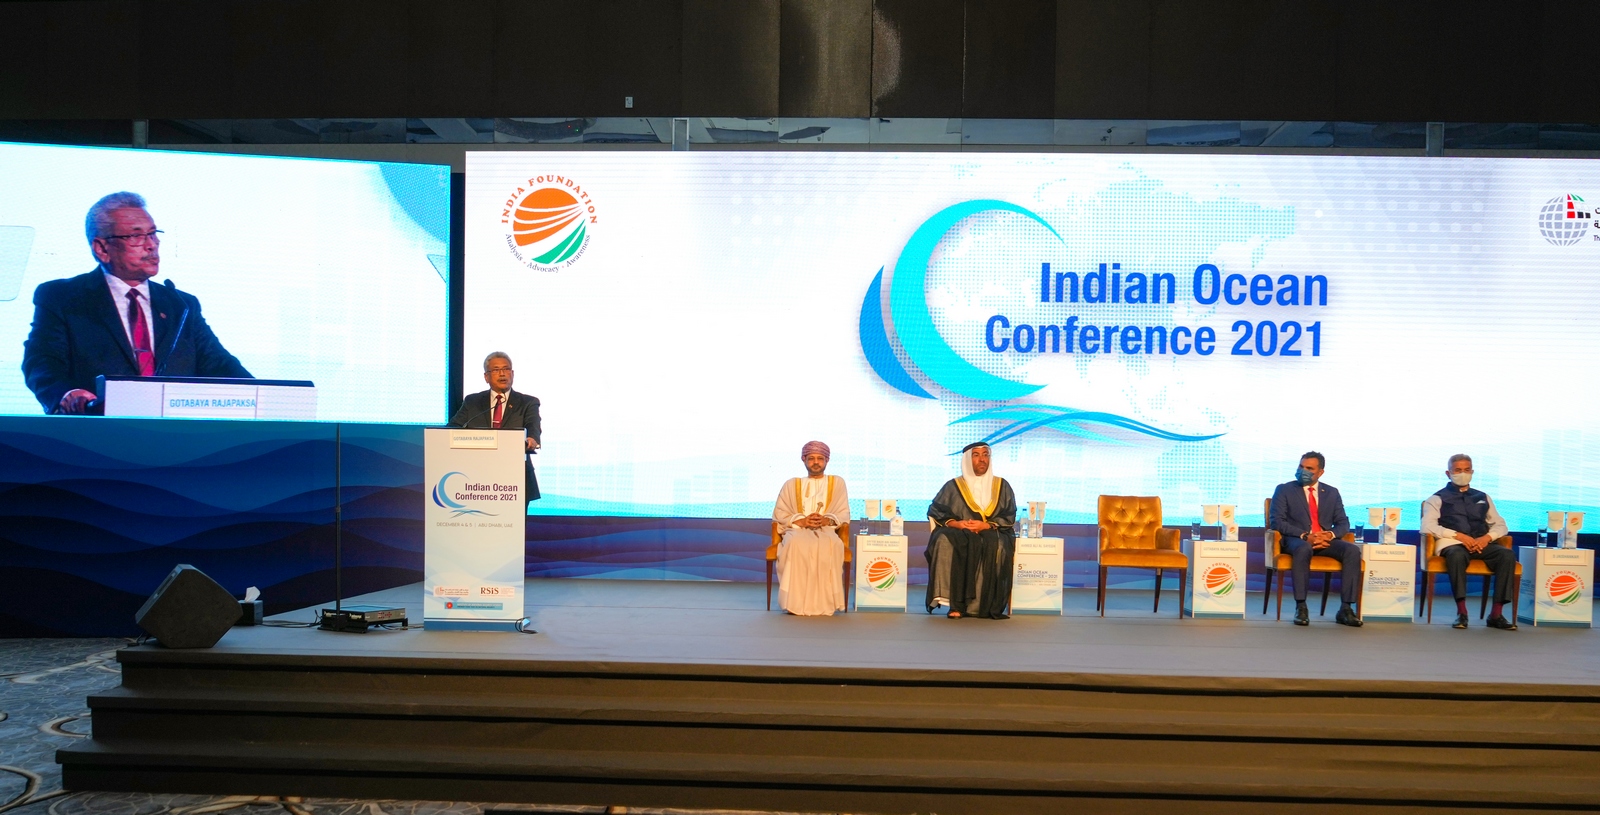 Let’s unite to accelerate economic recovery following the pandemic – President at Indian Ocean Conference